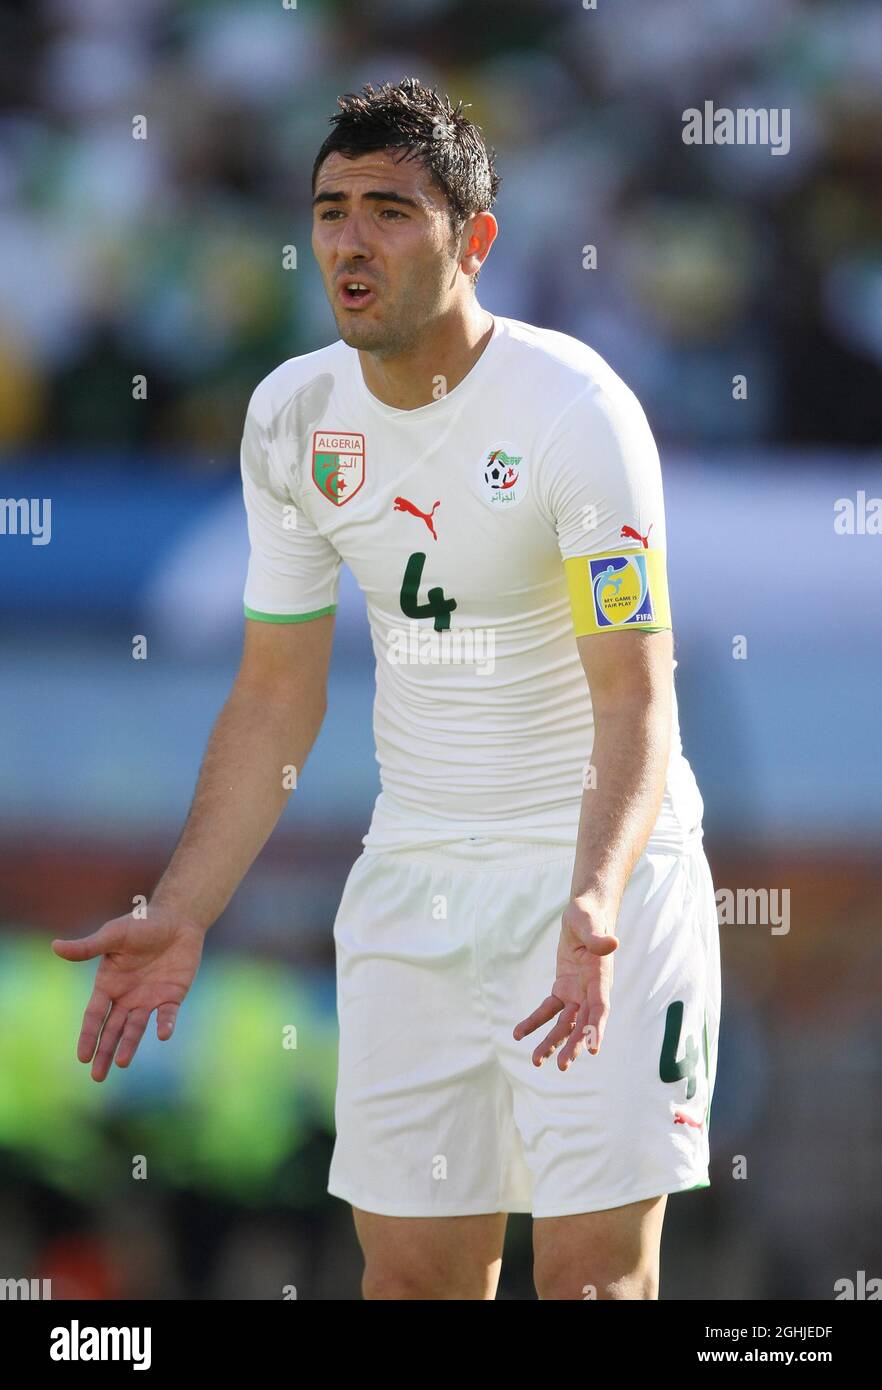 Algeria's Anther Yahia in action during the FIFA World Cup 2010 Group C match between Algeria and Slovenia at Peter Mokaba Stadium in South Africa. Stock Photo